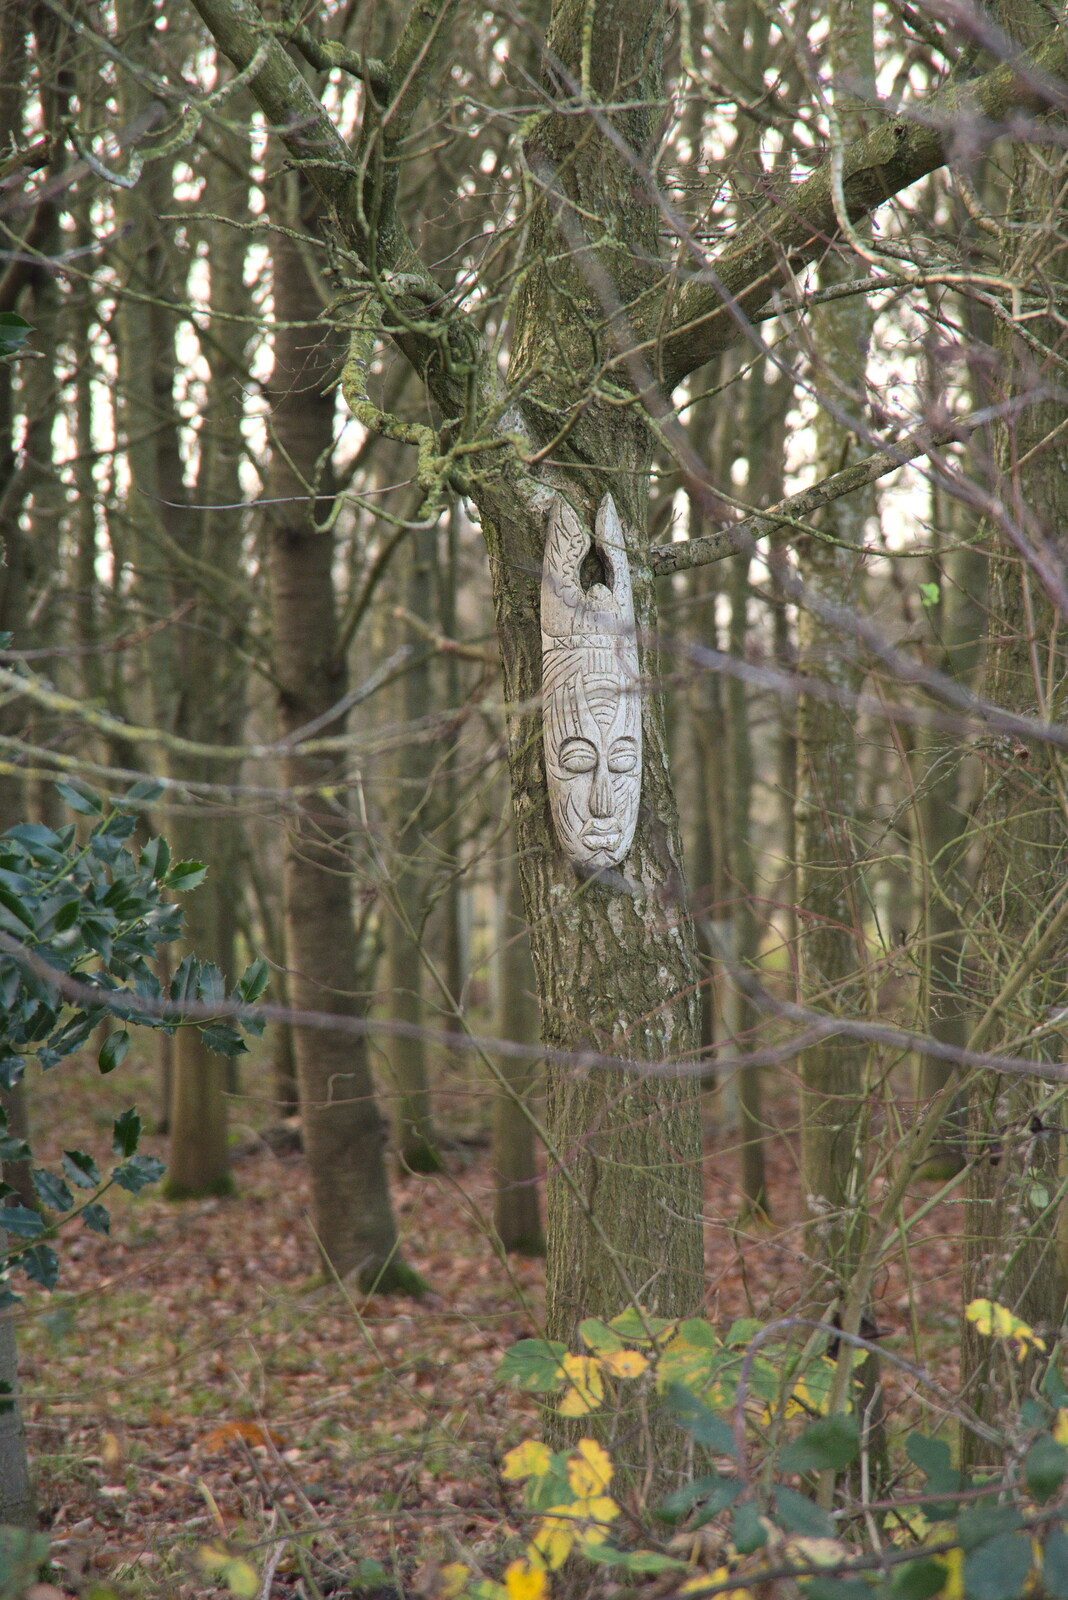 There's a wooden head in the woods from New Year's Day, Brome, Suffolk - 1st January 2022